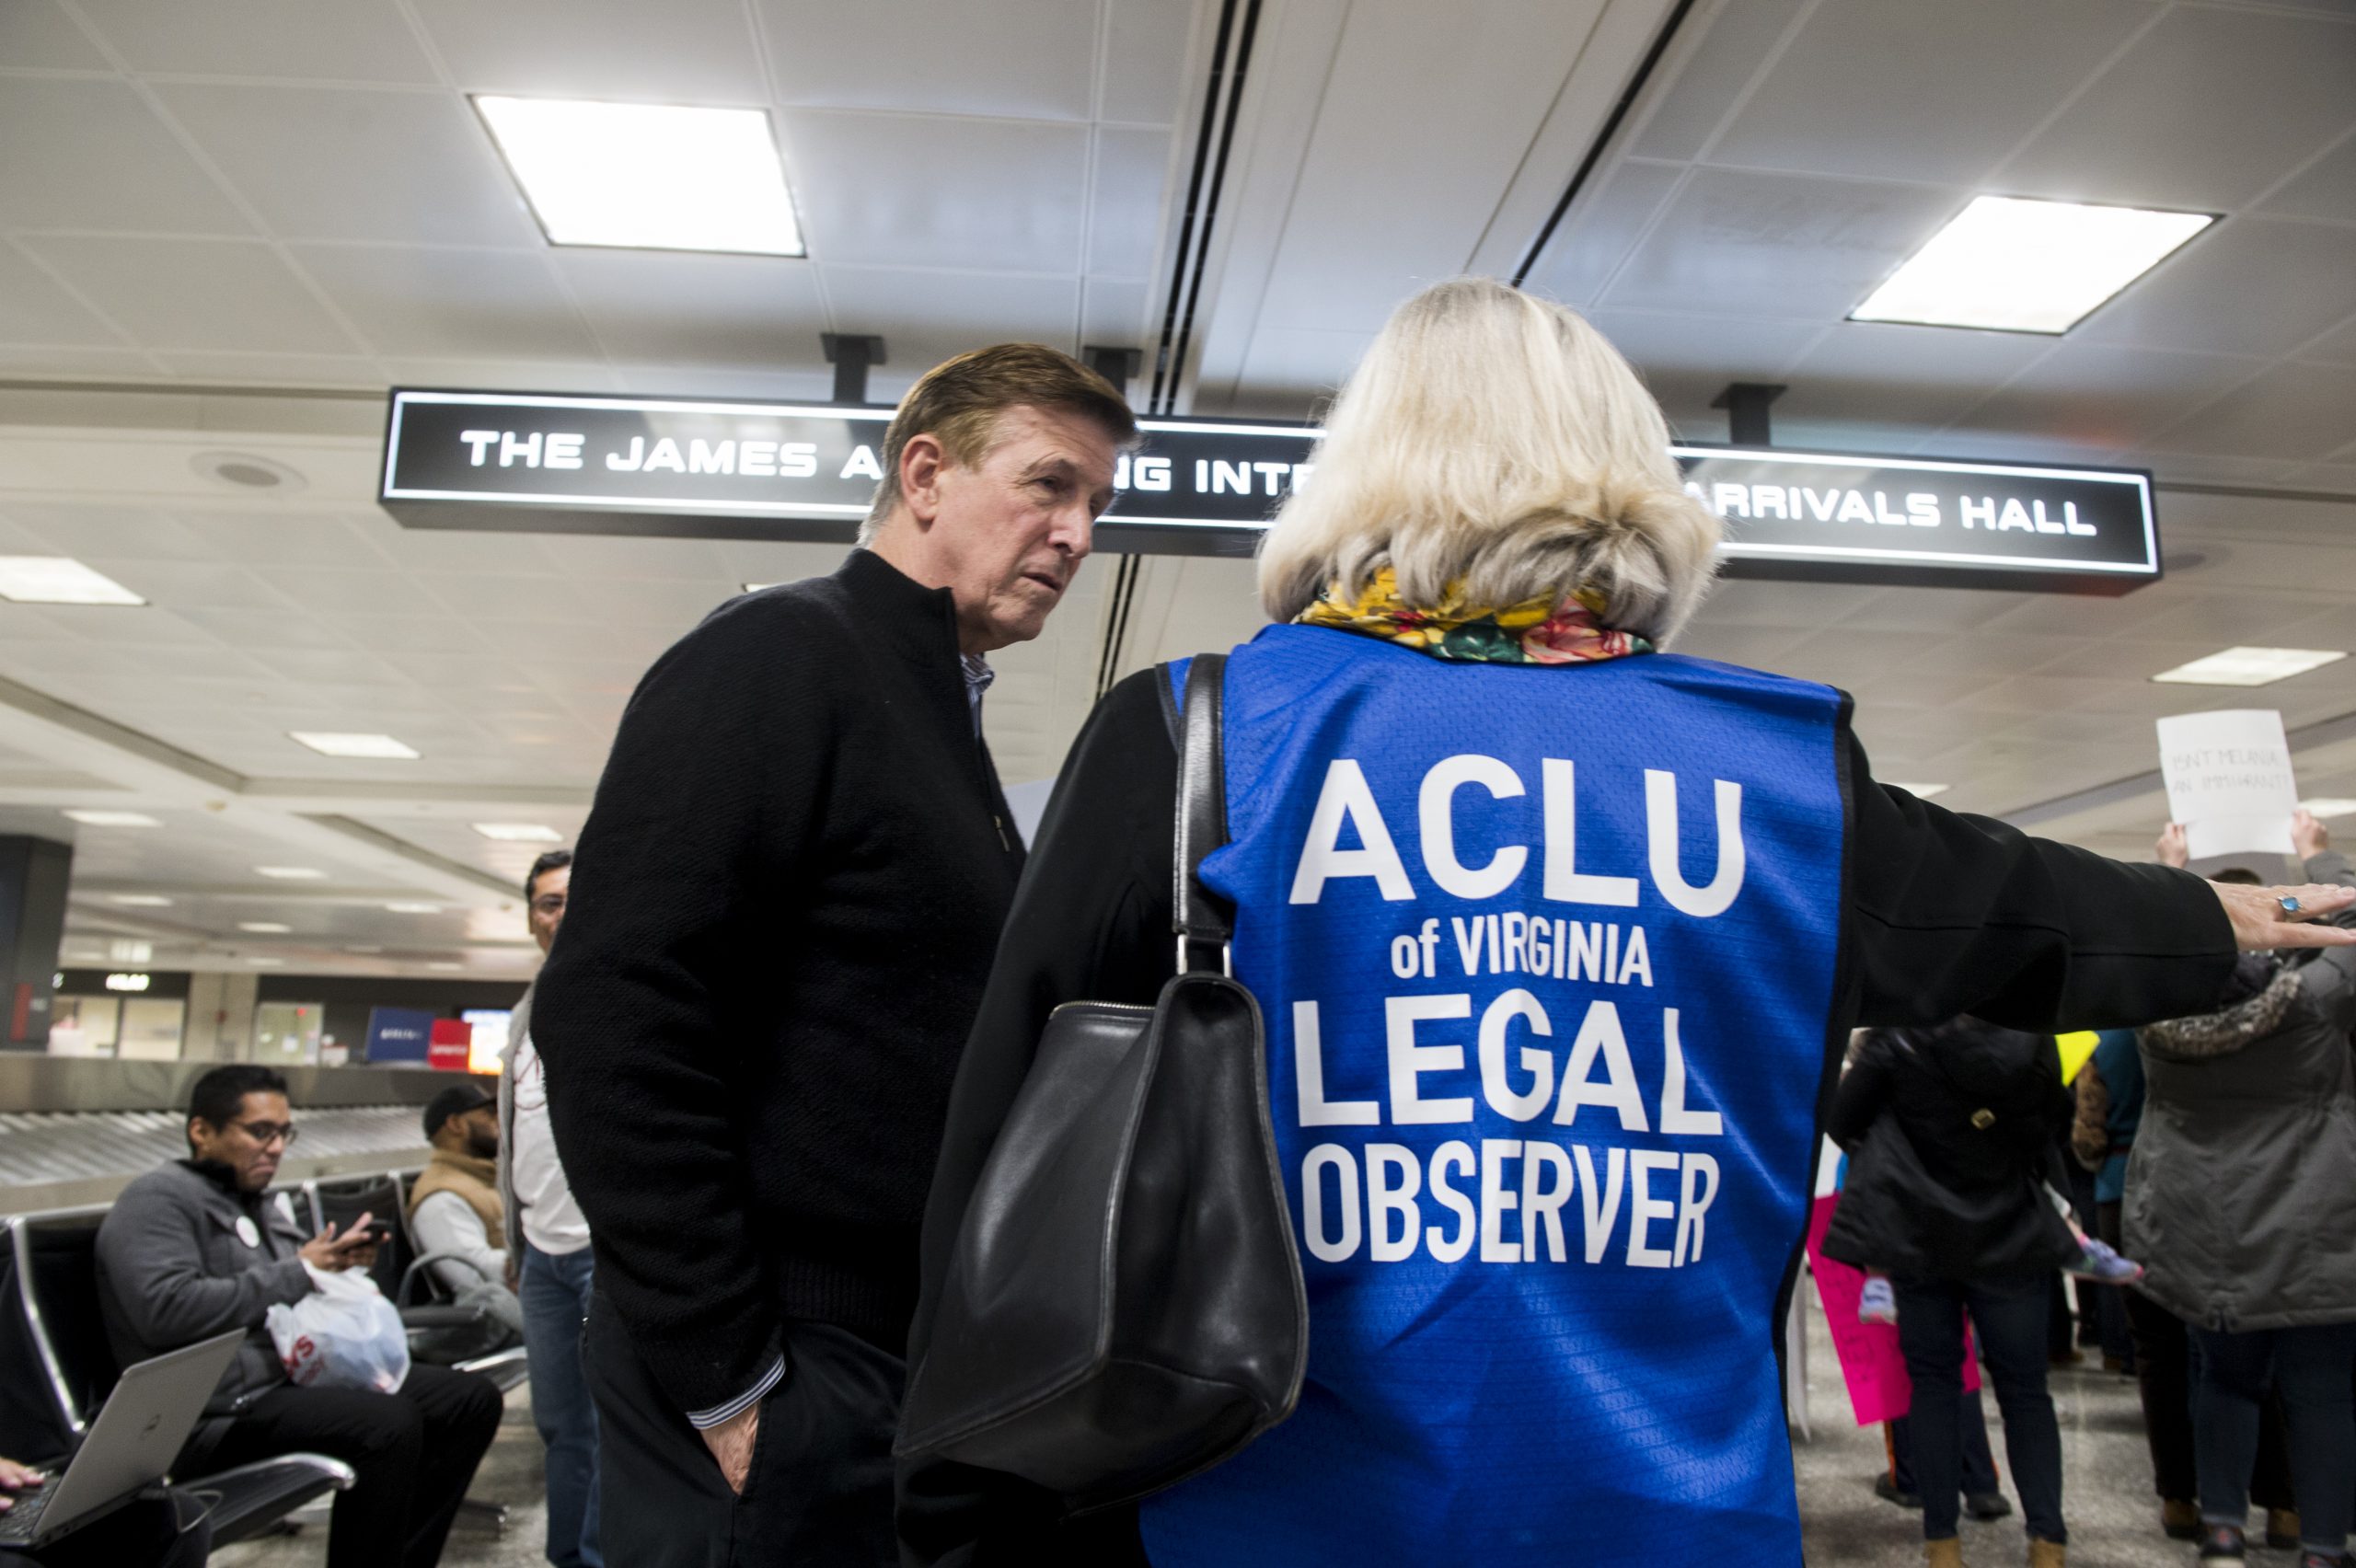 ACLU Donations: How to Make a Tax